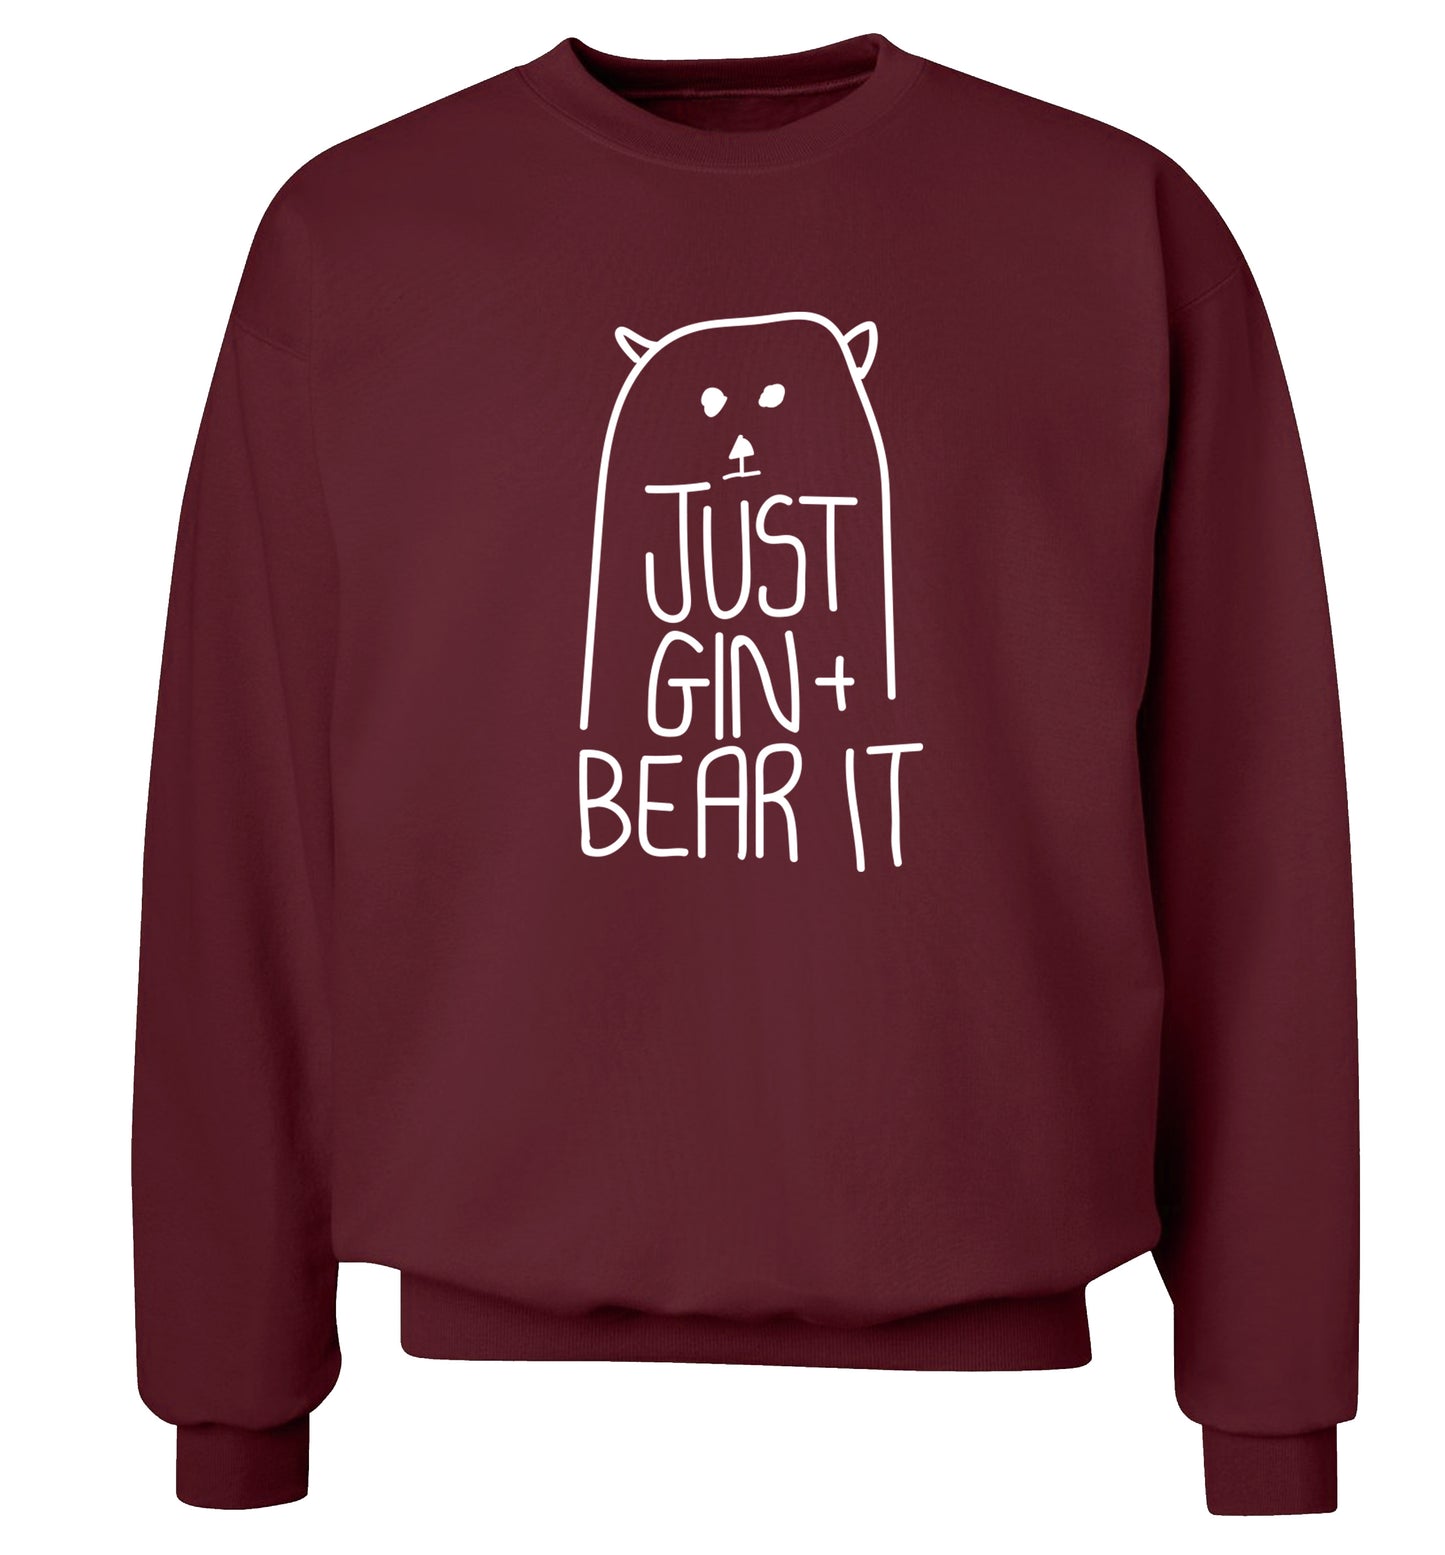 Just gin and bear it Adult's unisex maroon Sweater 2XL